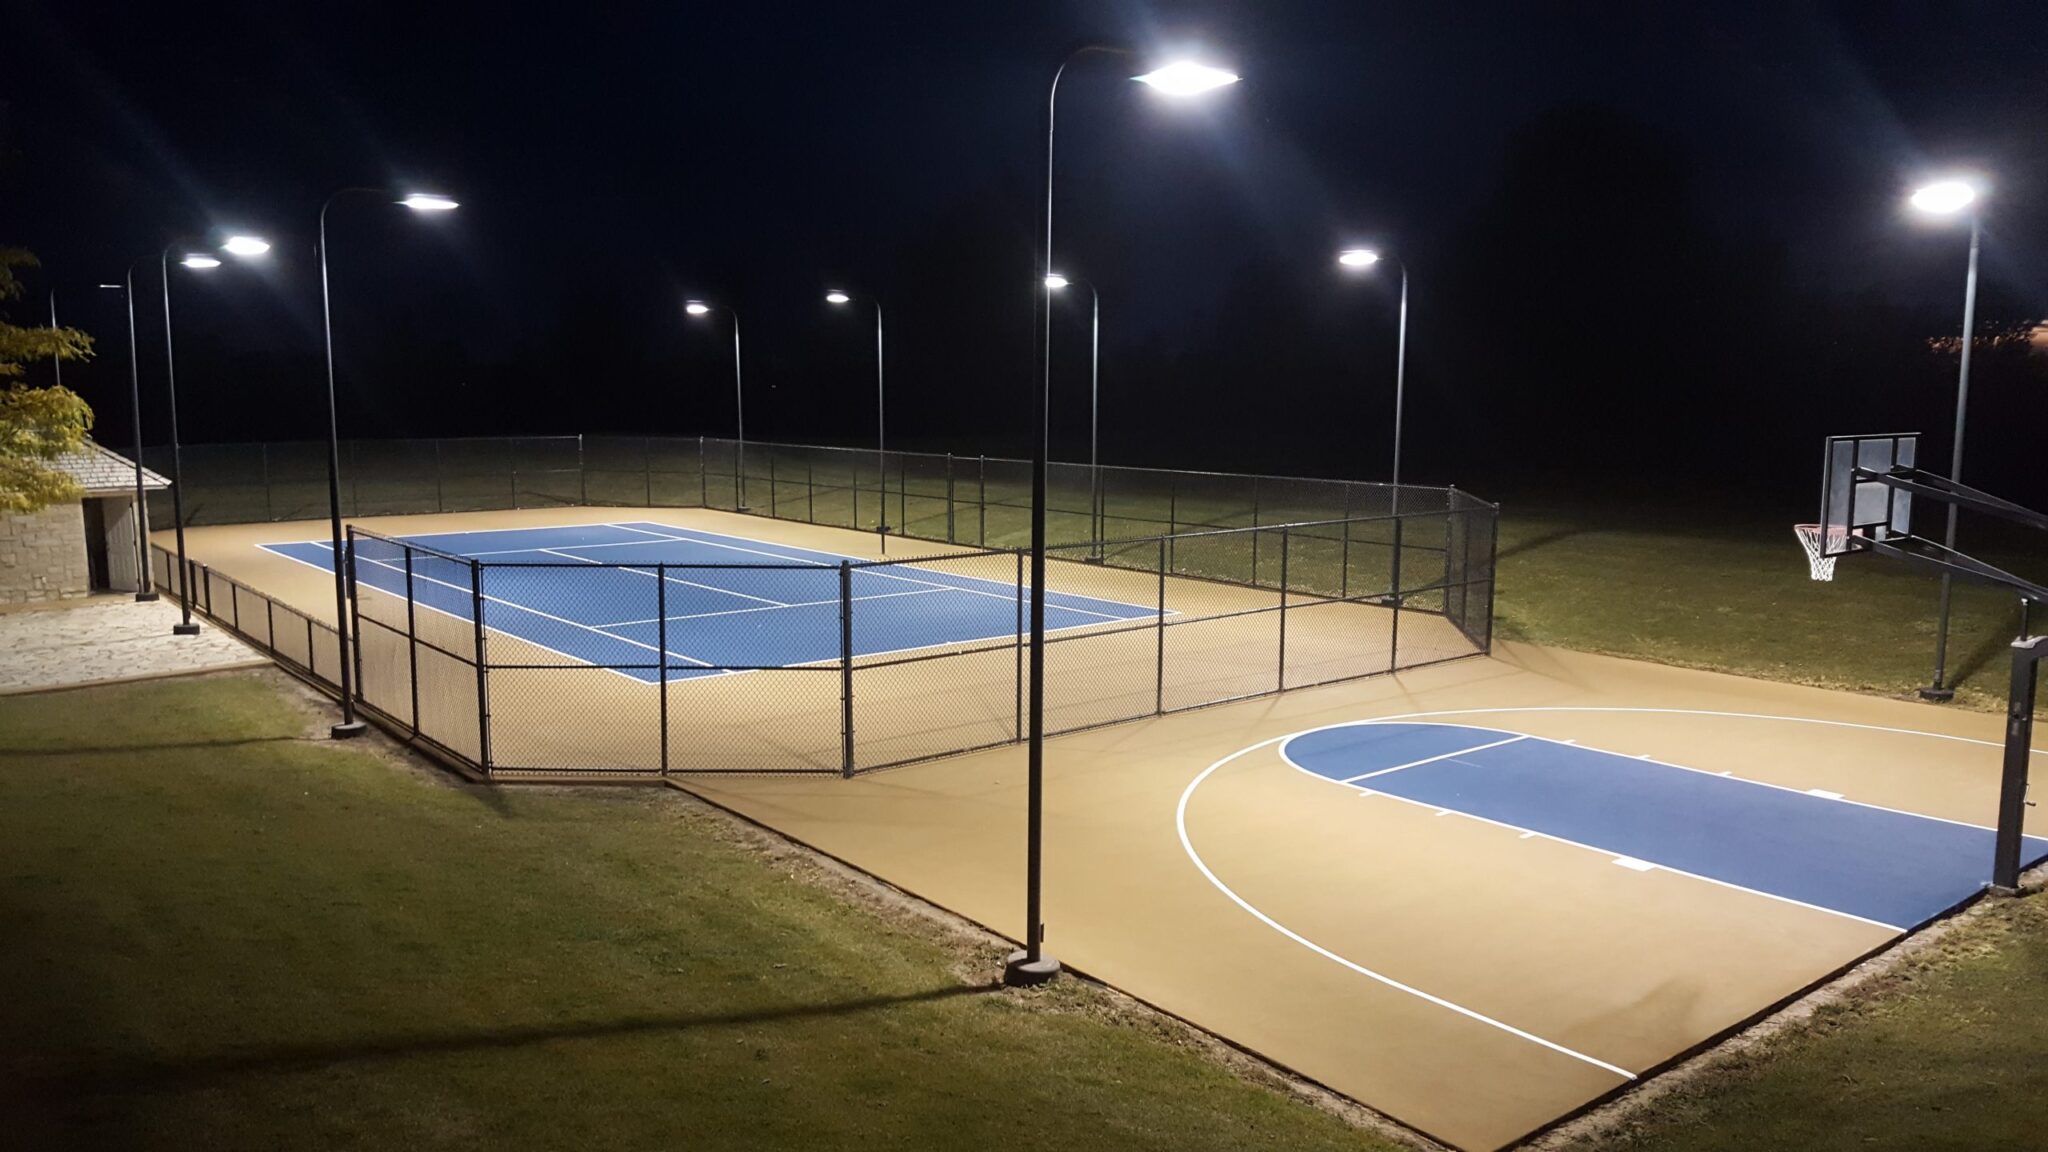 New outdoor tennis and basketball court under the lights.